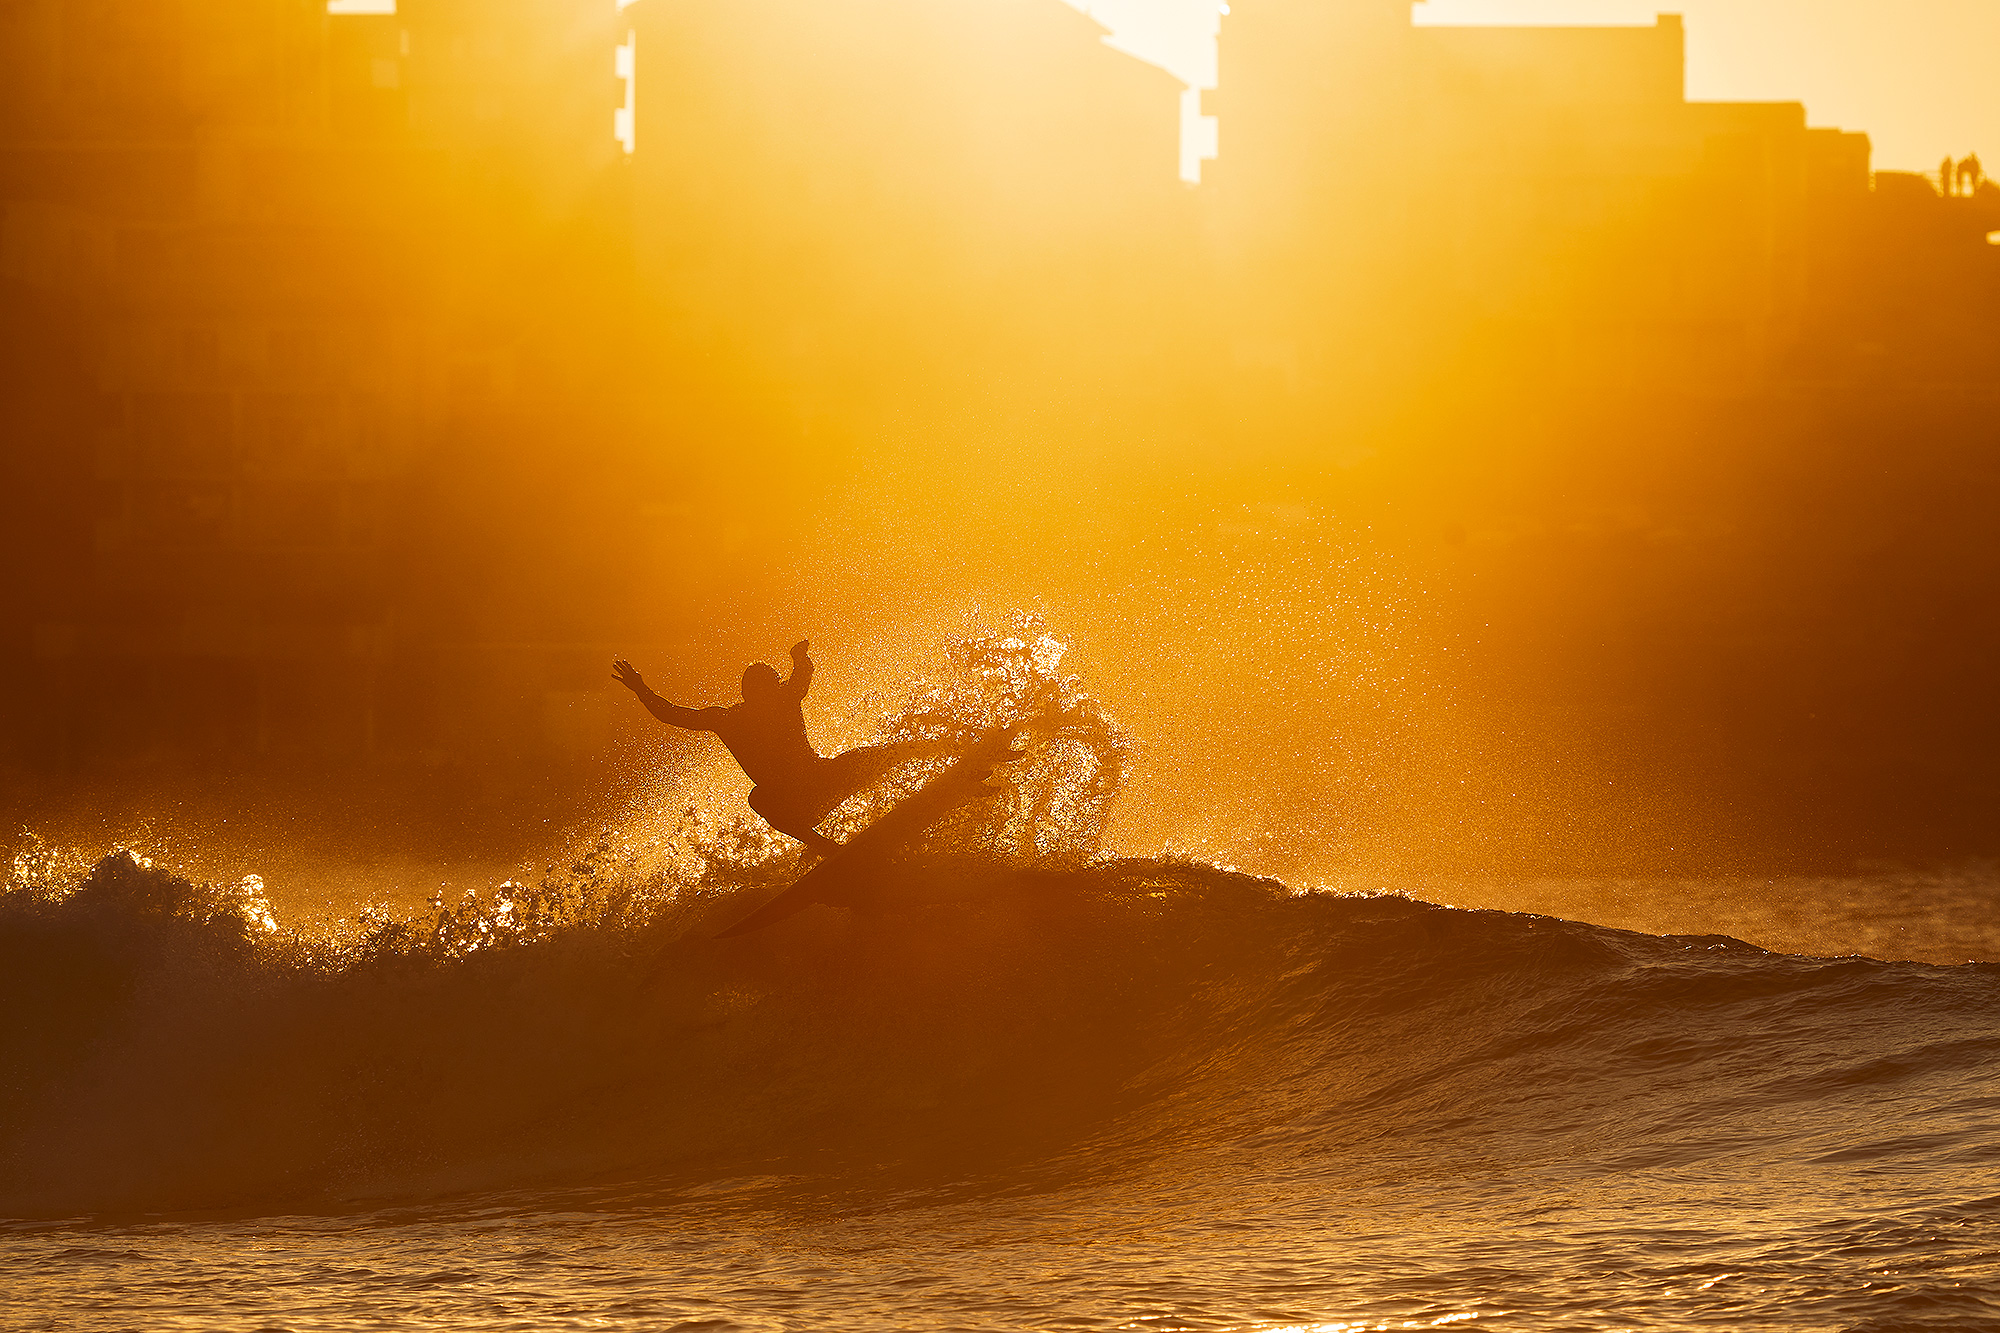 Me mate Kirk from Cronulla, blowing up in the right spot of light